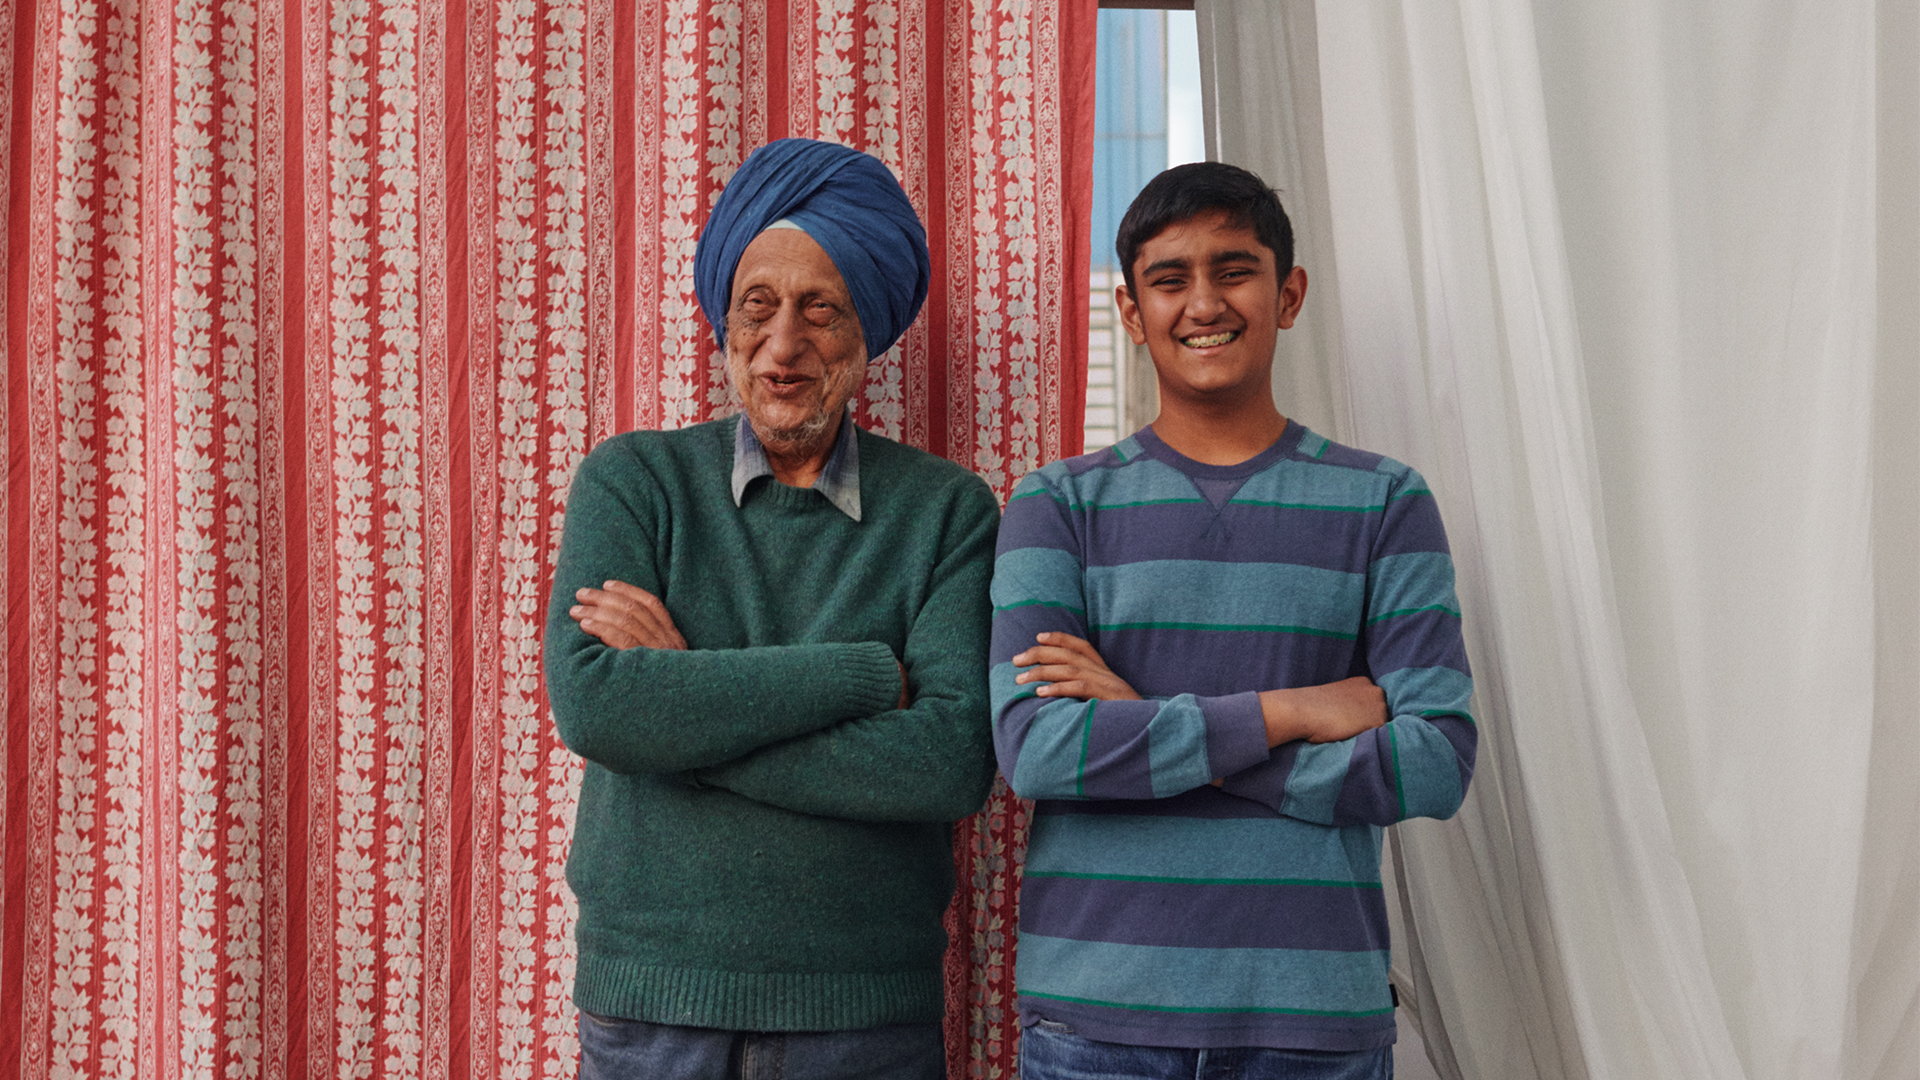 Father and son stand in front of textiles, smiling with arms folded